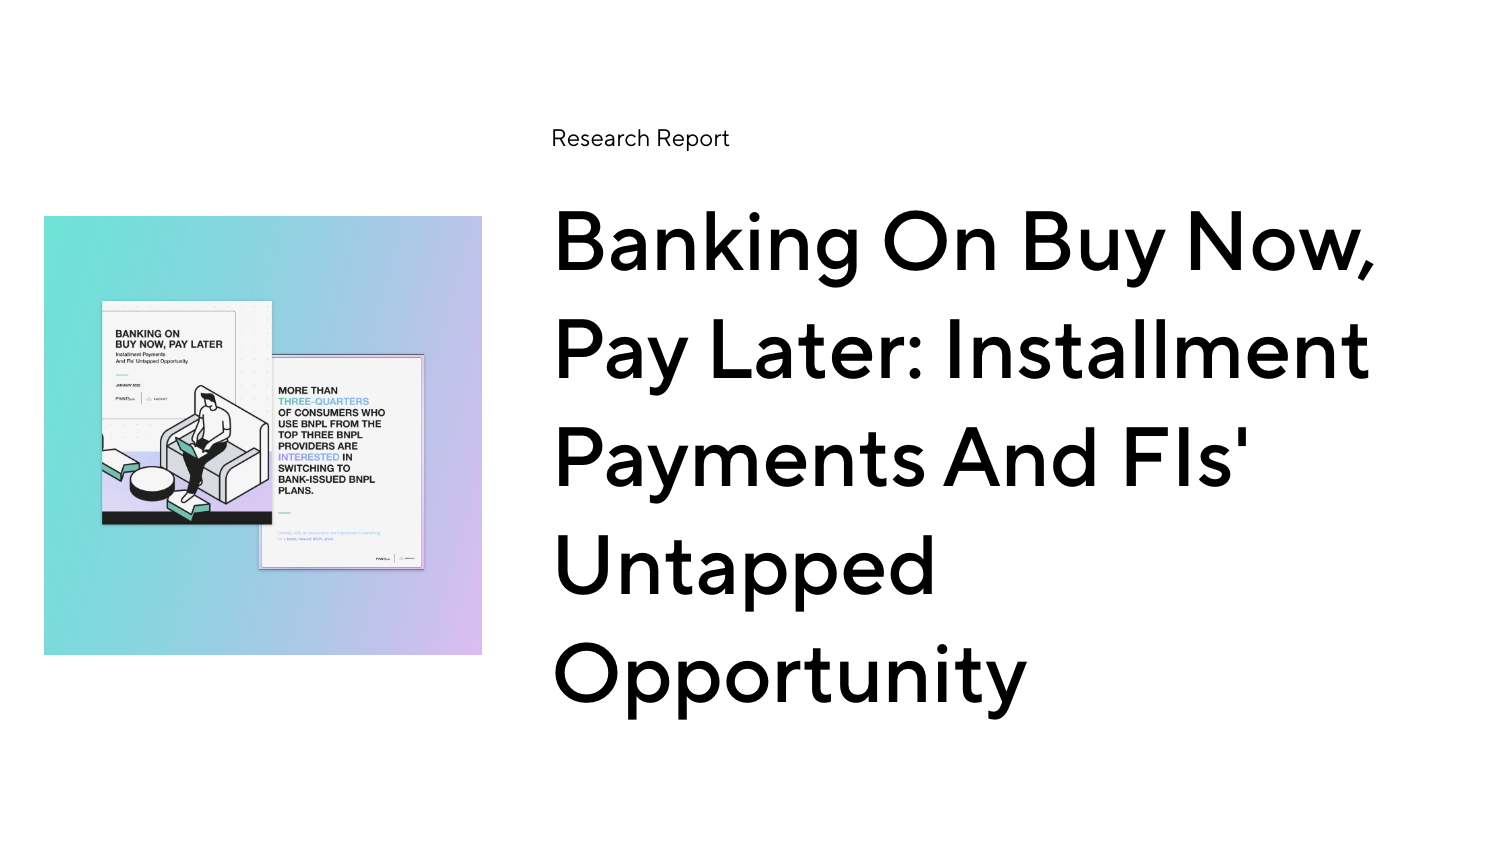 Banking On Buy Now, Pay Later: Installment Payments And FIs' Untapped Opportunity